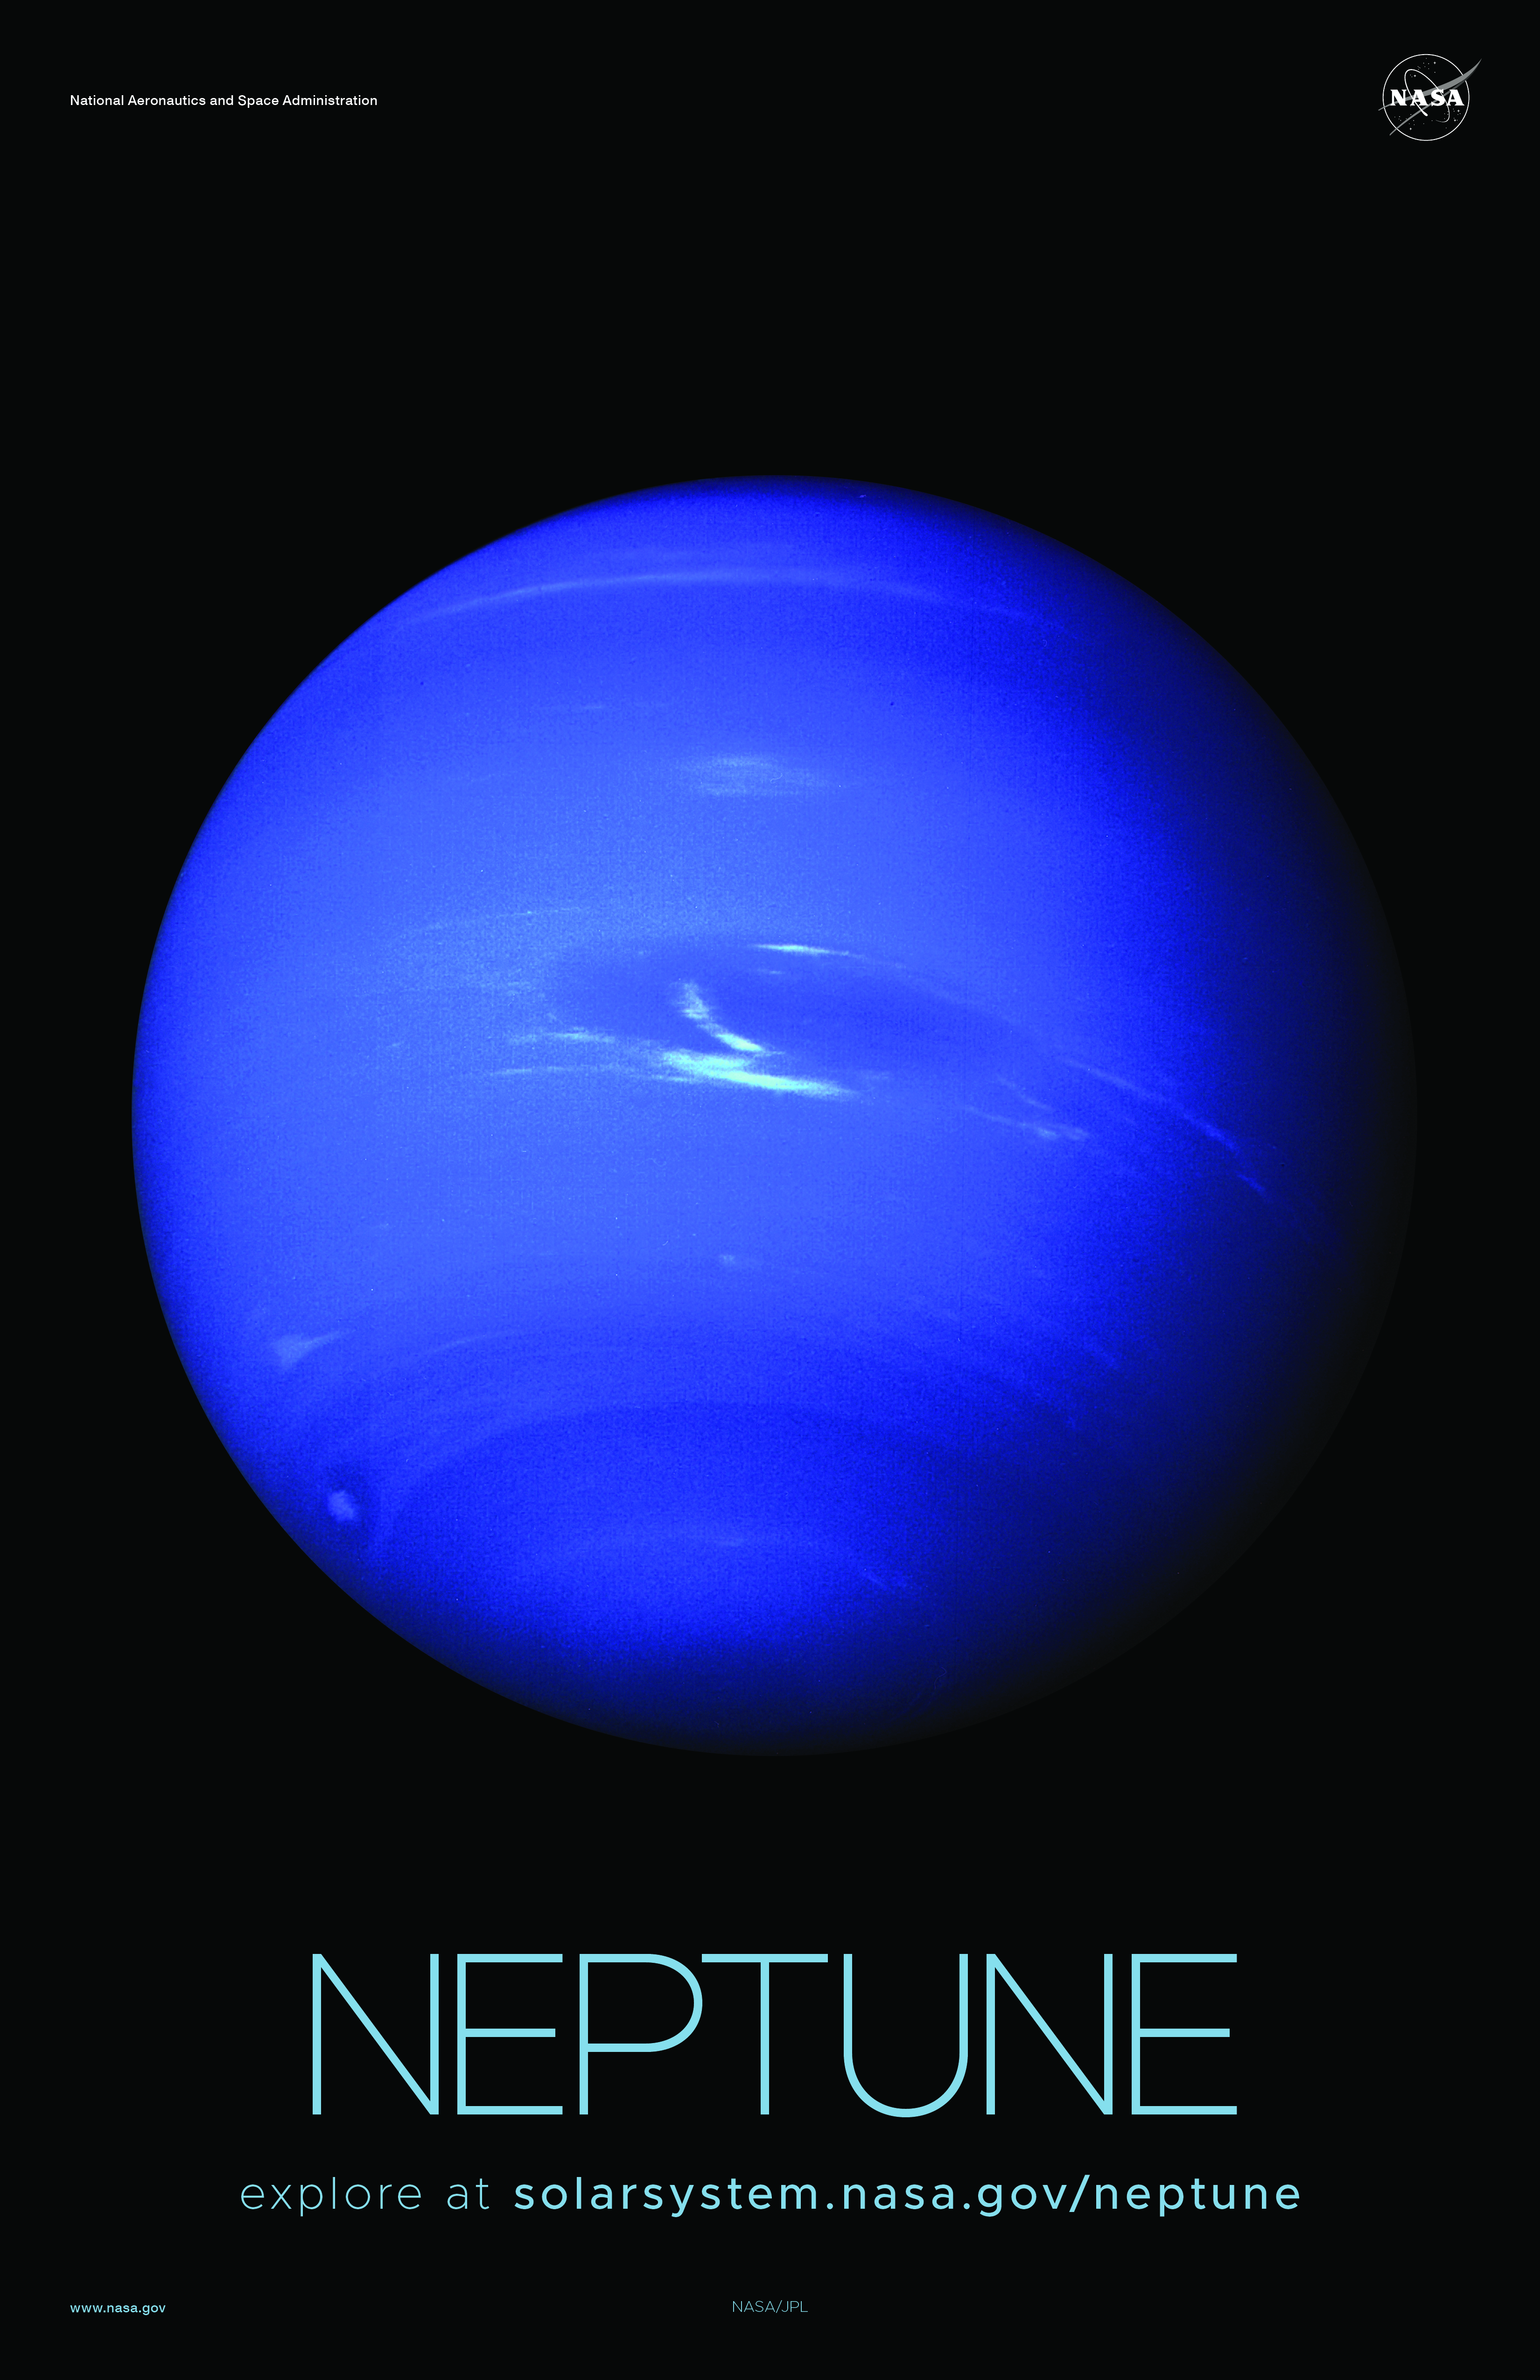 A full disk view of the planet Neptune, with the Great Dark Spot and some wispy white clouds, is visible.